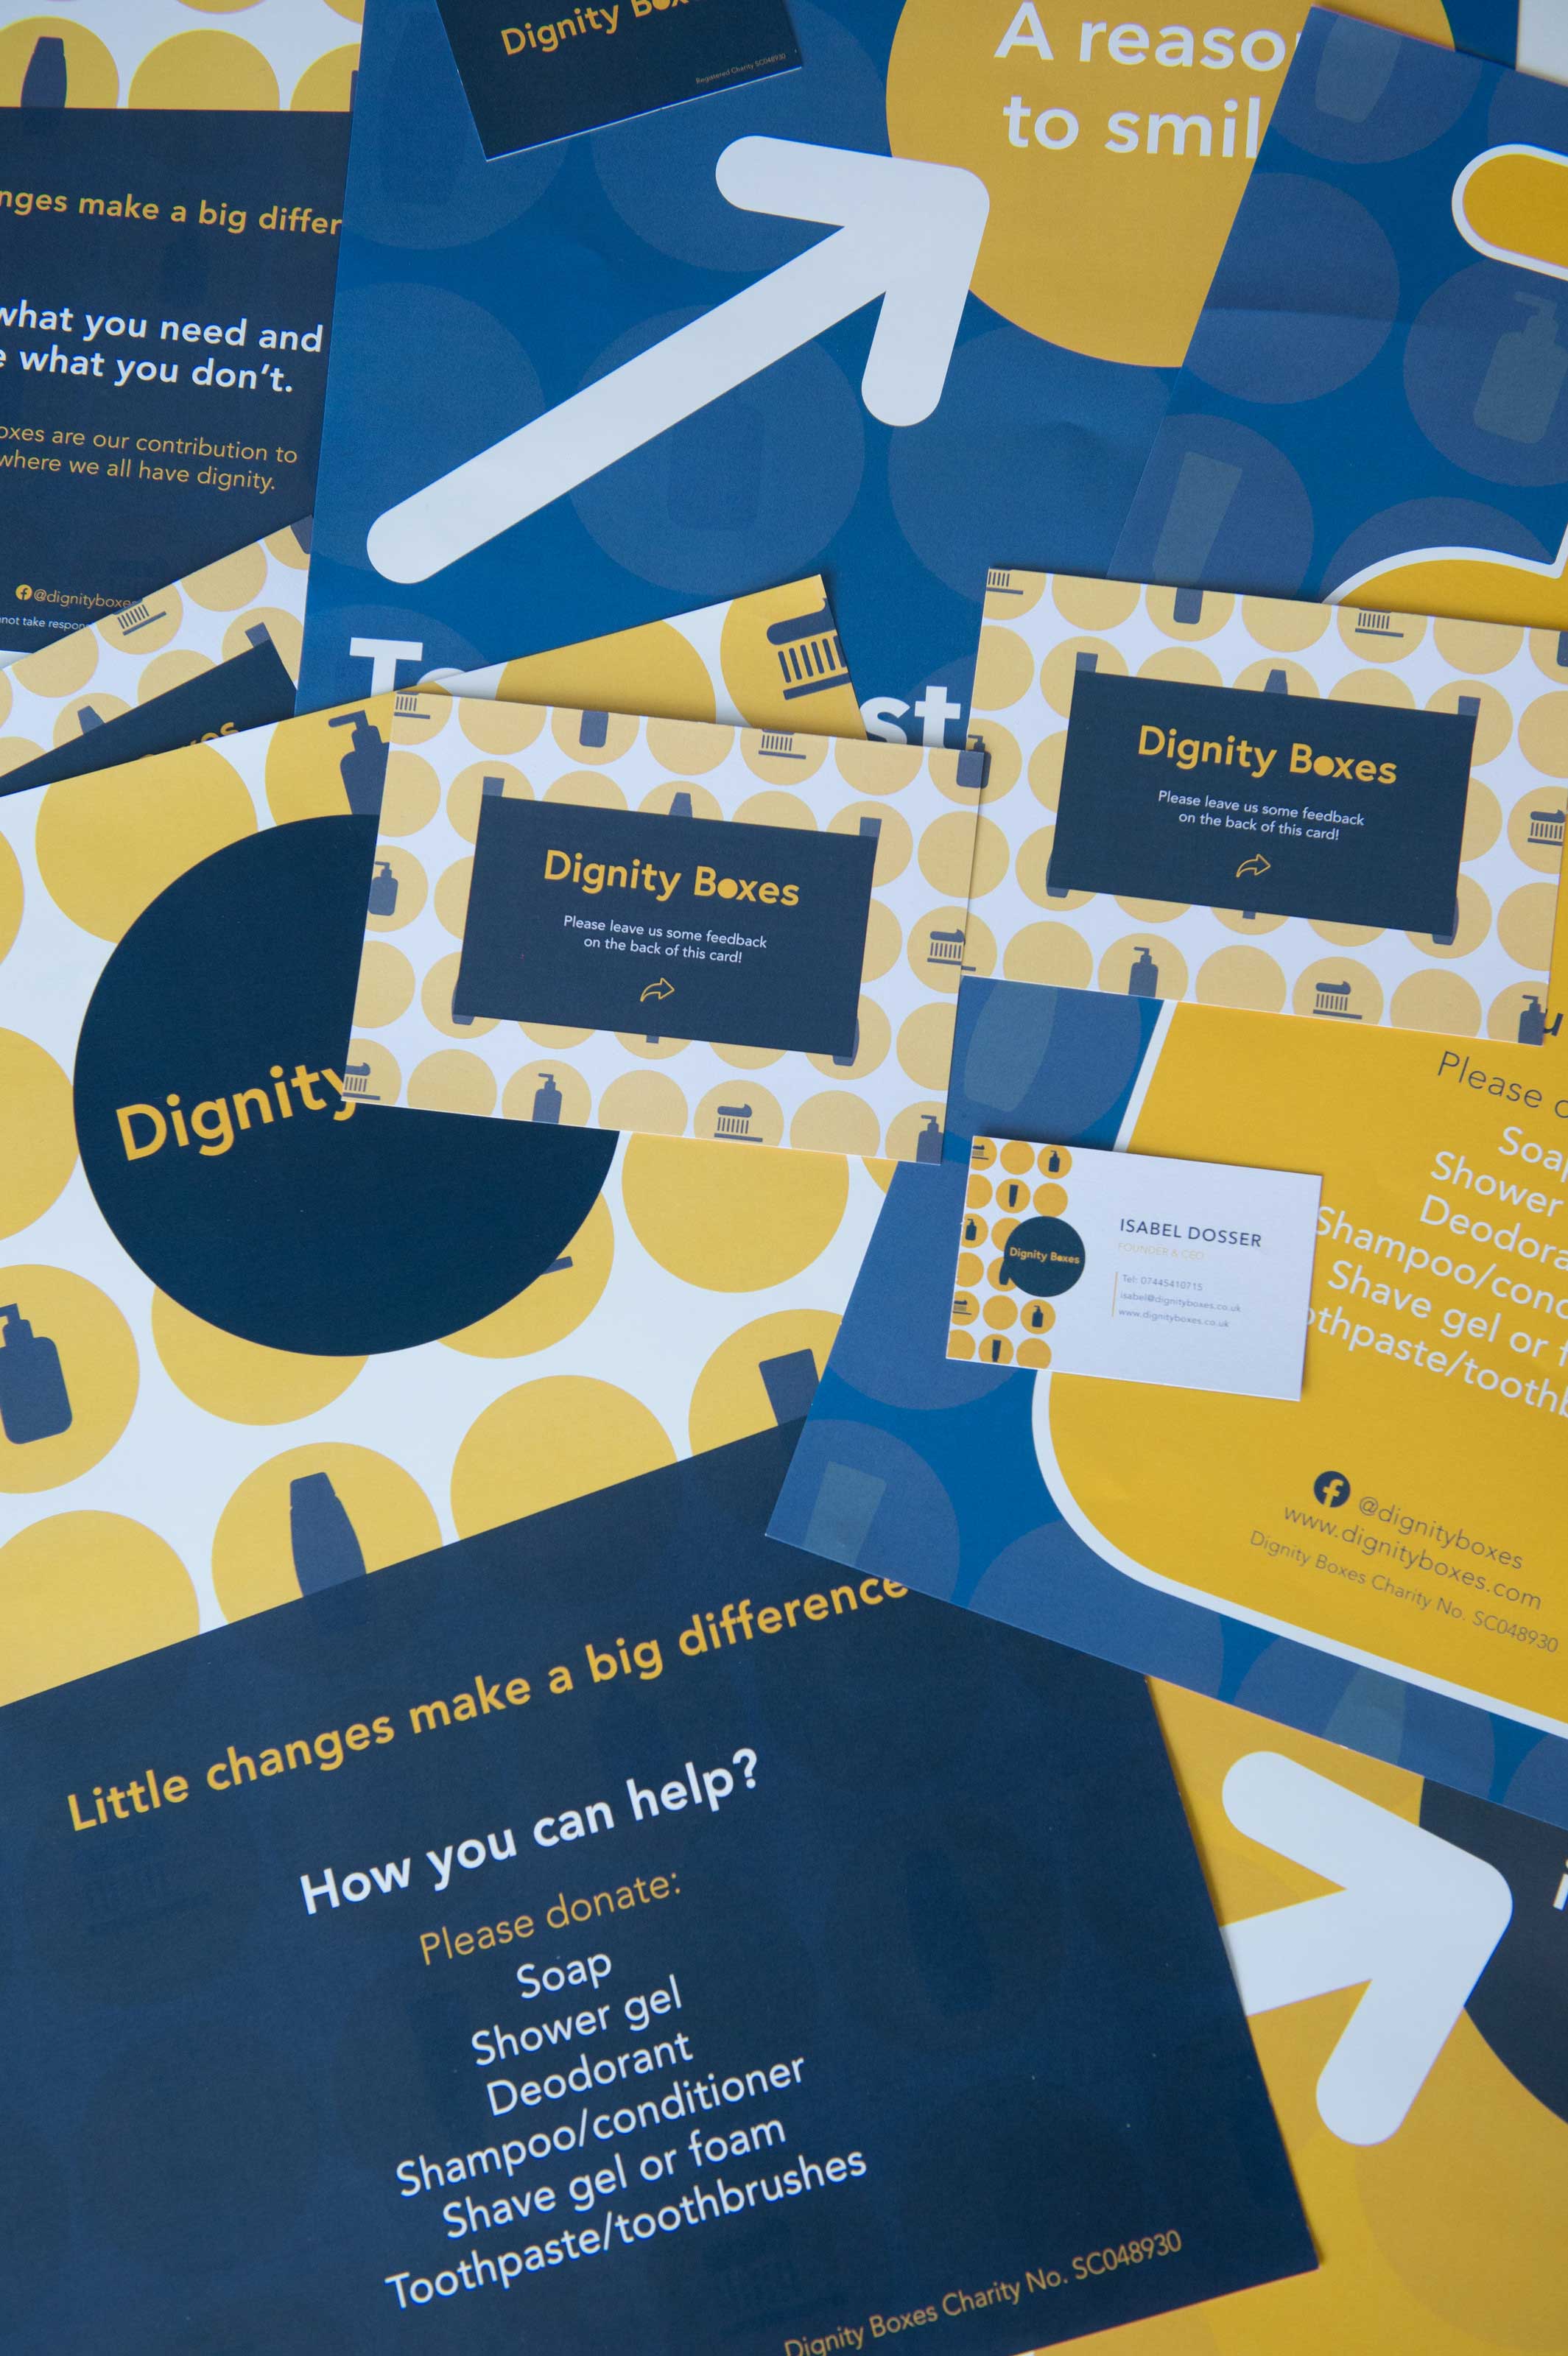 New Dignity Boxes' branding